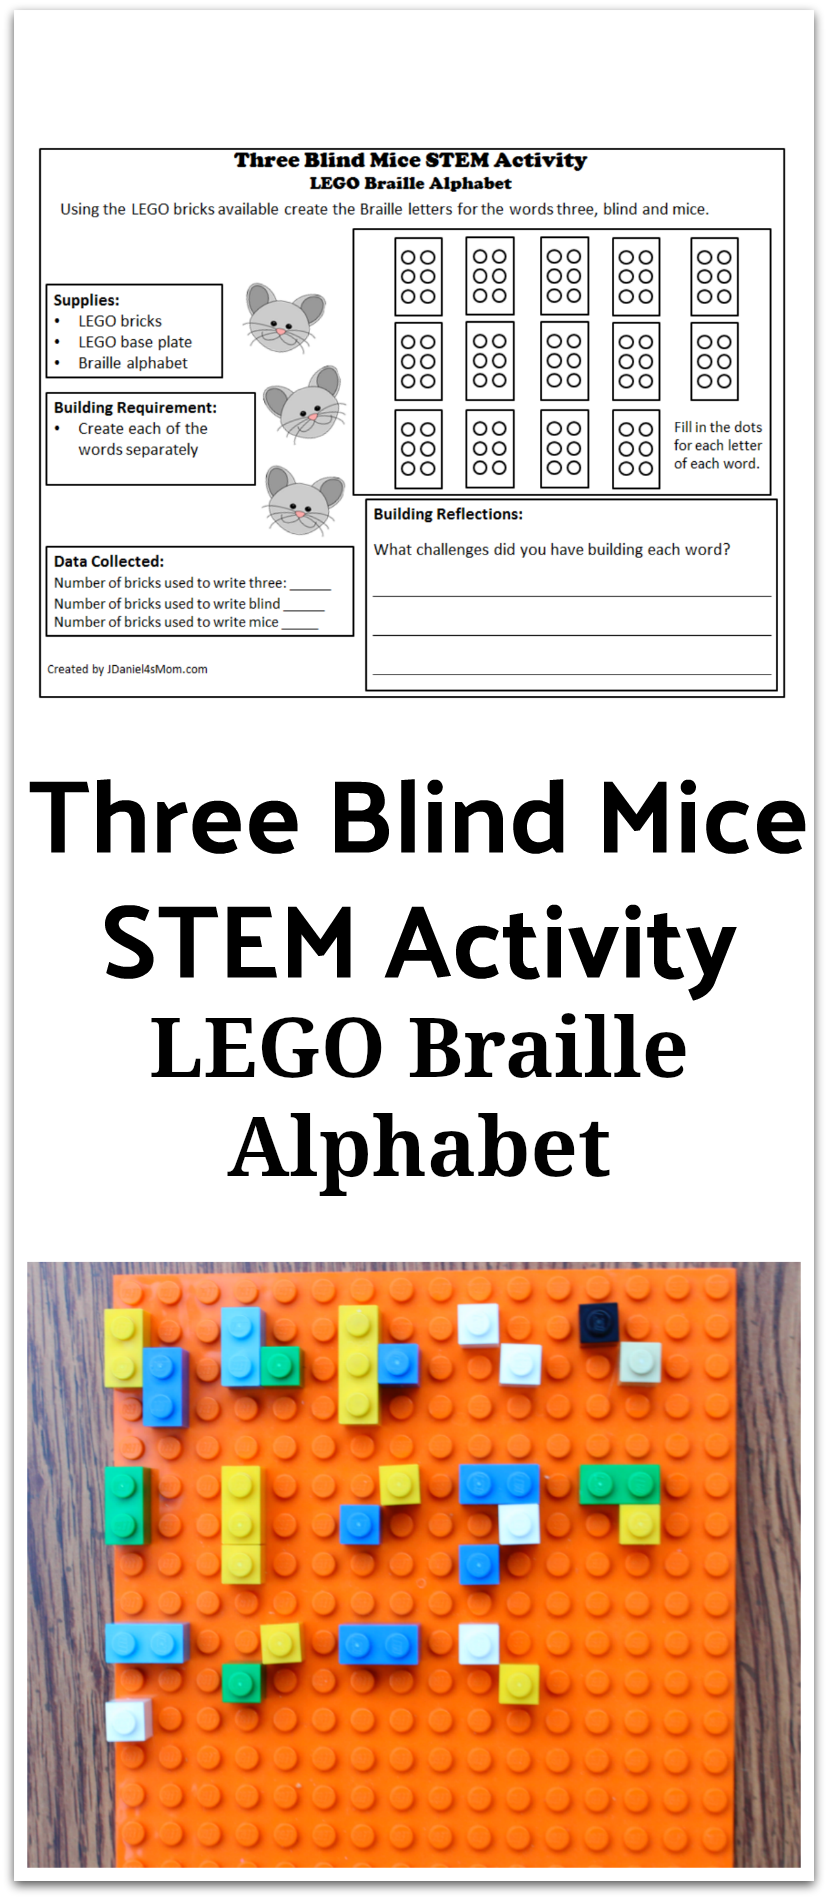 LEGO Braille Alphabet : Three Blind Mice STEM Activity - This activity has a planning and reflections printable. It gives your children at home or your students at school a chance to explore Braille.